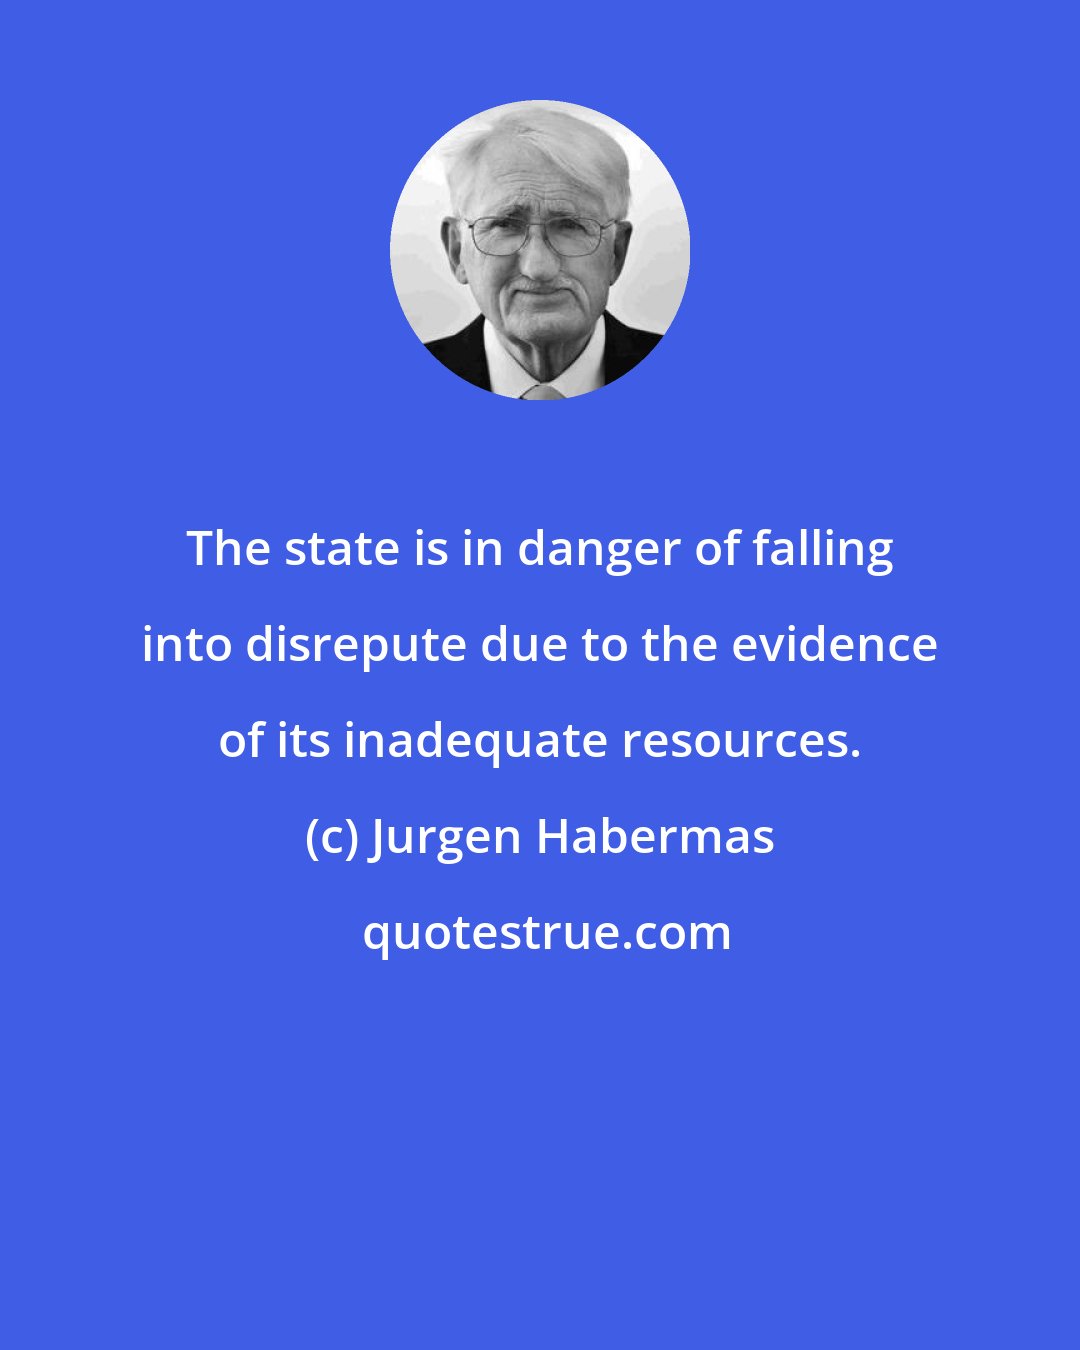 Jurgen Habermas: The state is in danger of falling into disrepute due to the evidence of its inadequate resources.